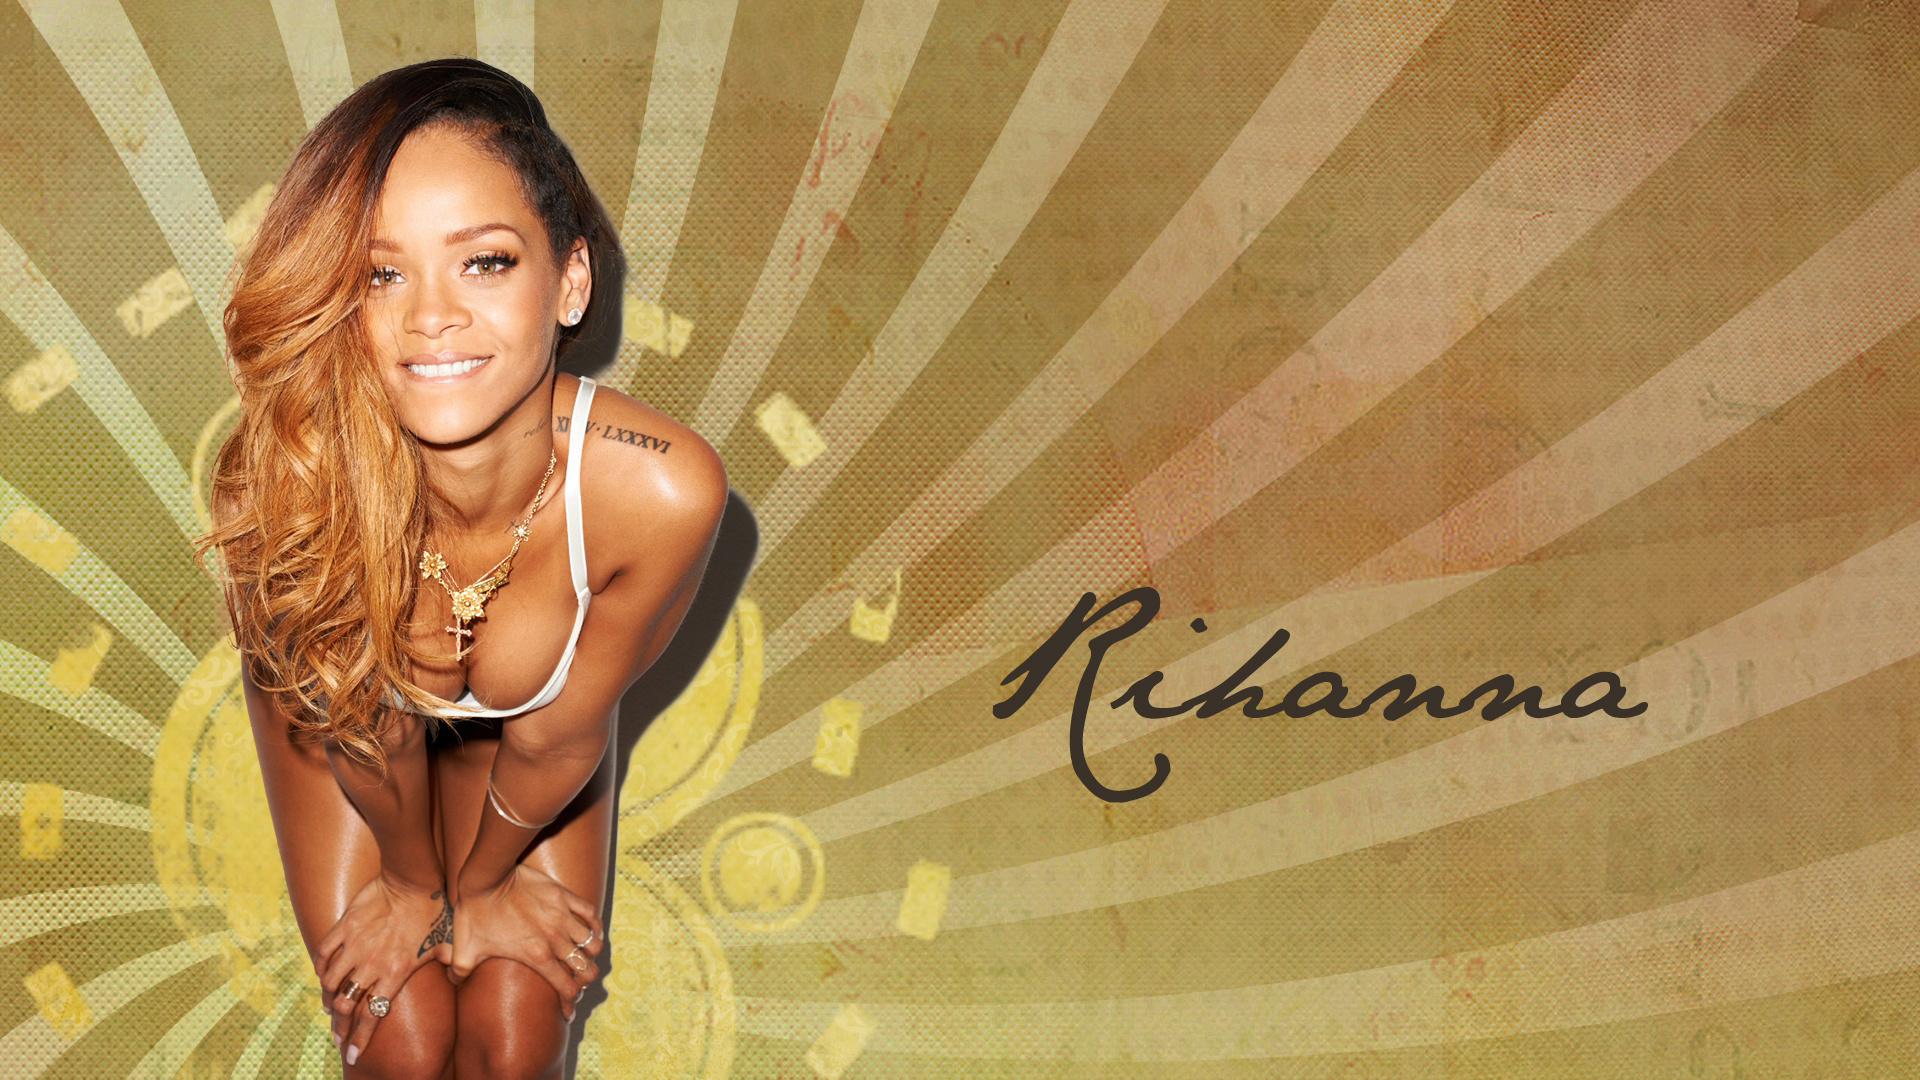 Rihanna Wallpapers, HD Rihanna Backgrounds, Free Images Download